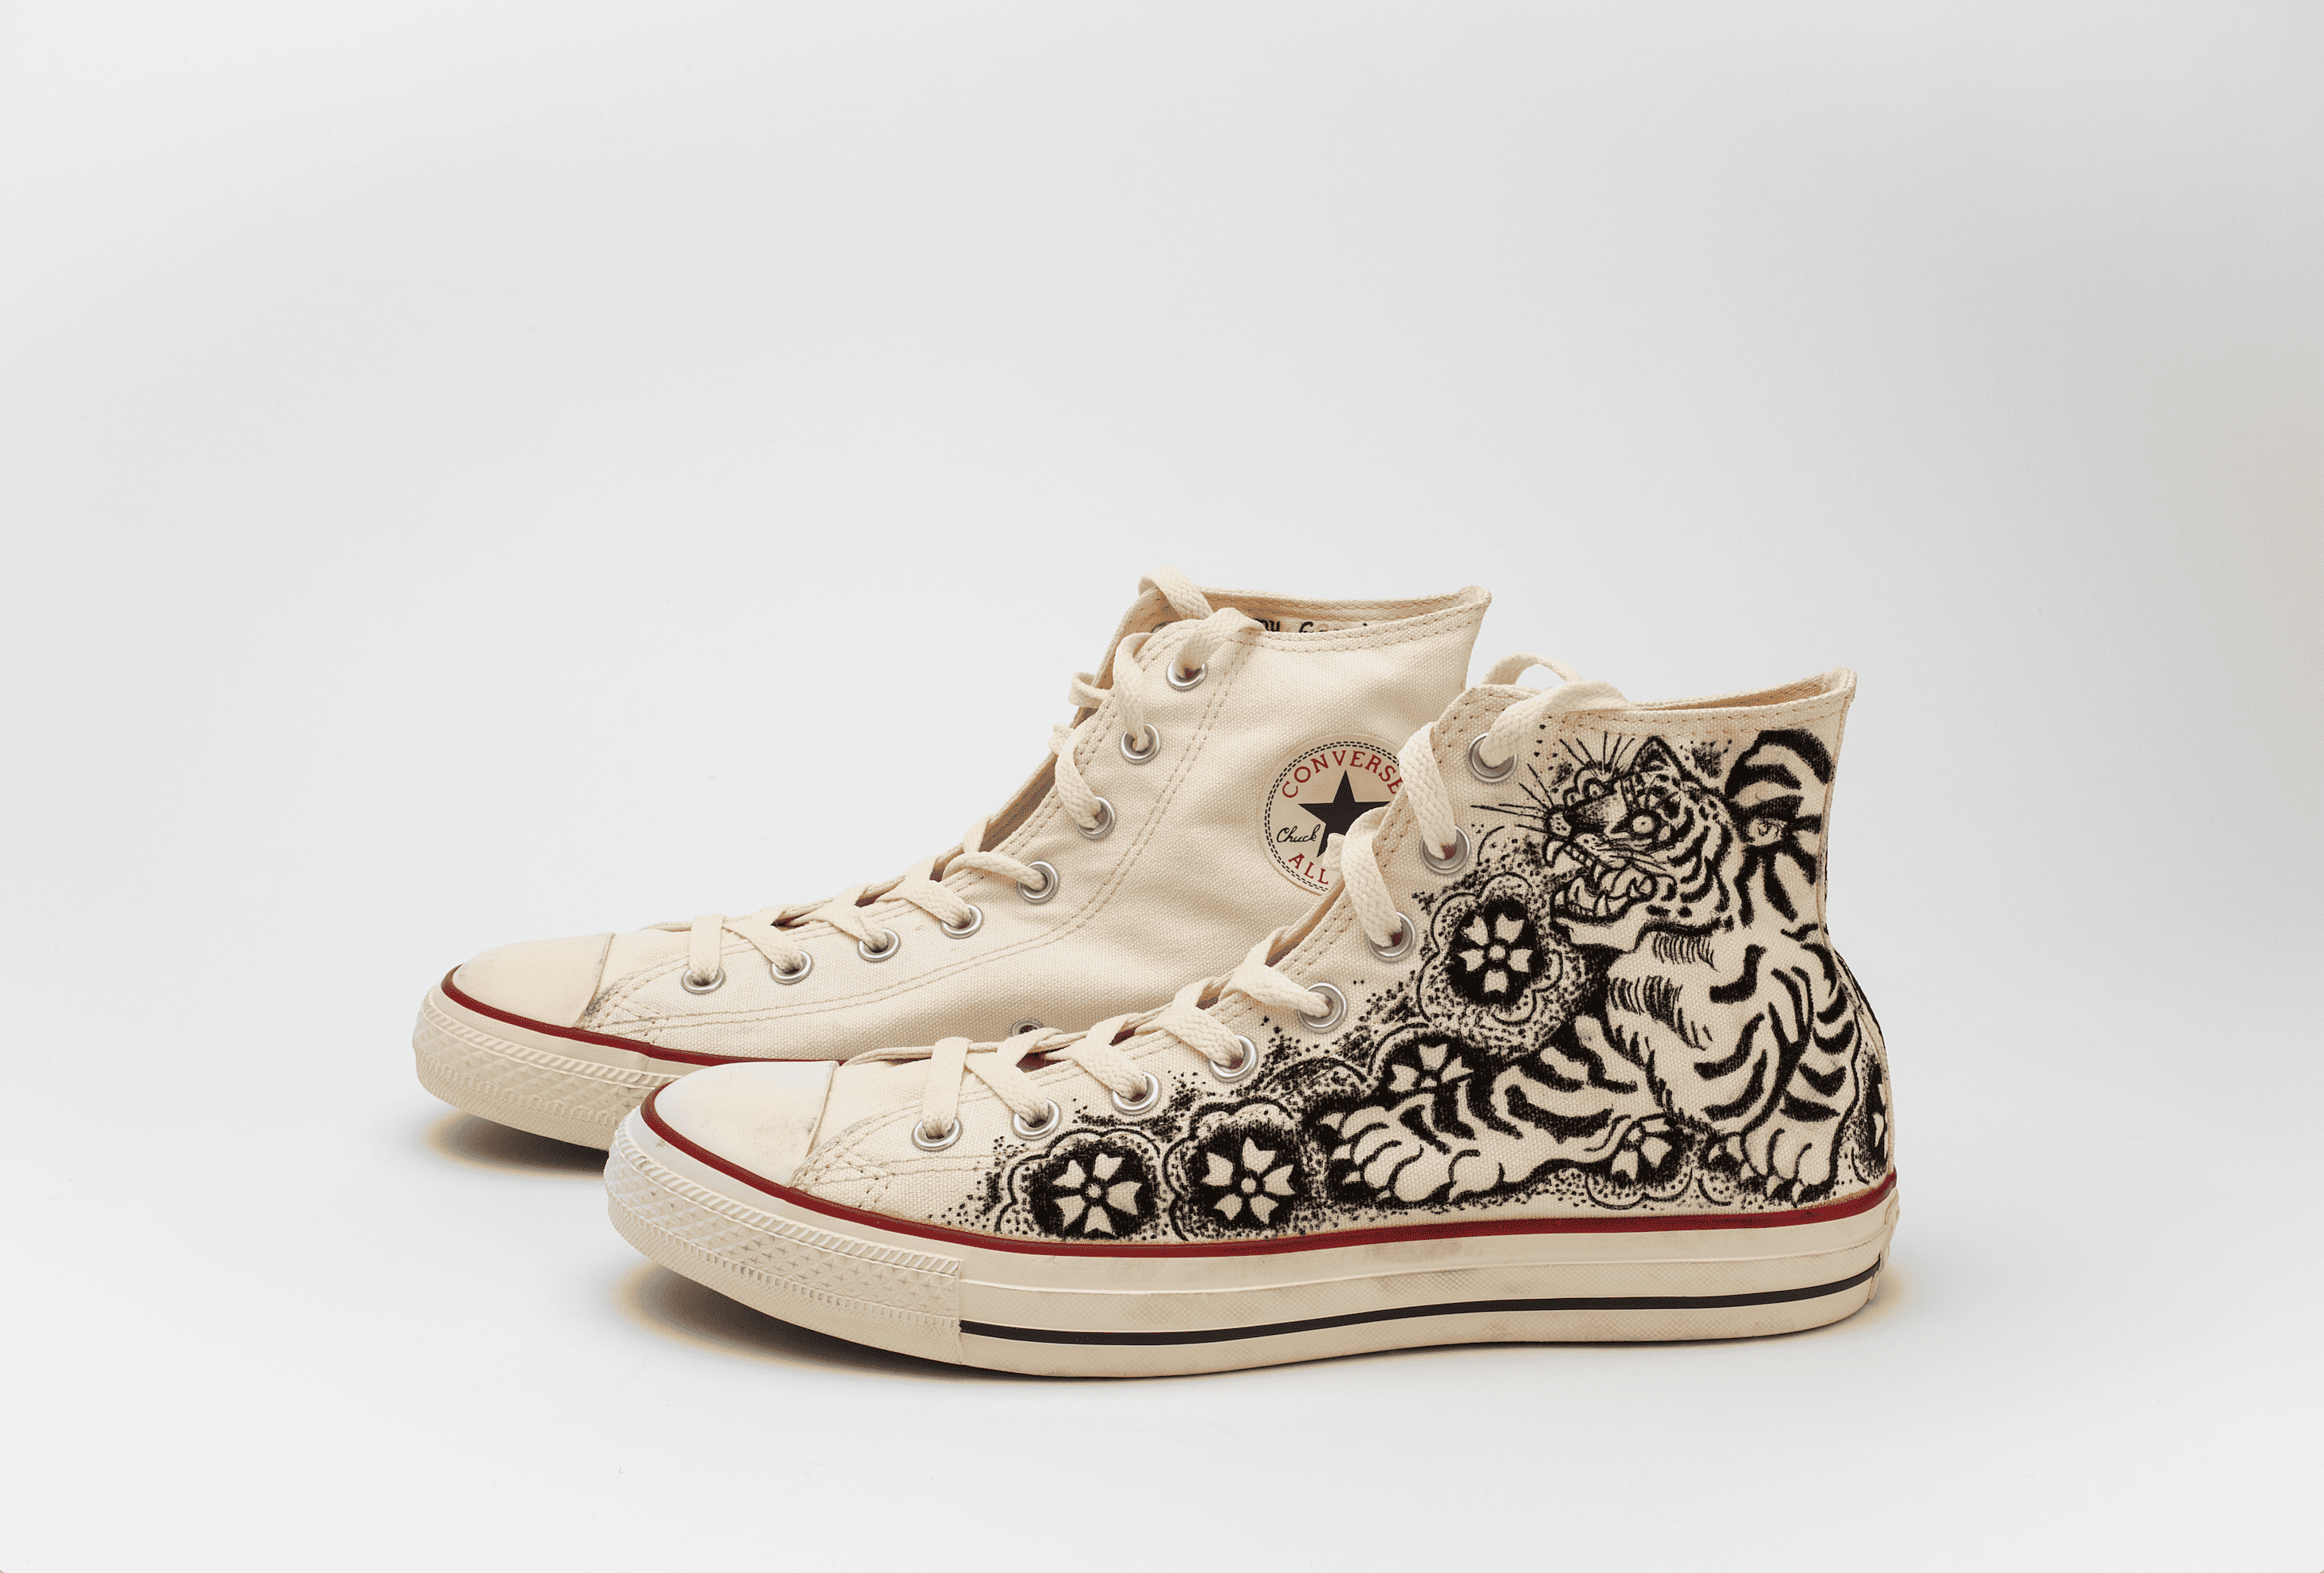 A pair of high-top sneakers with an intricate tiger and floral design embroidered on the side.